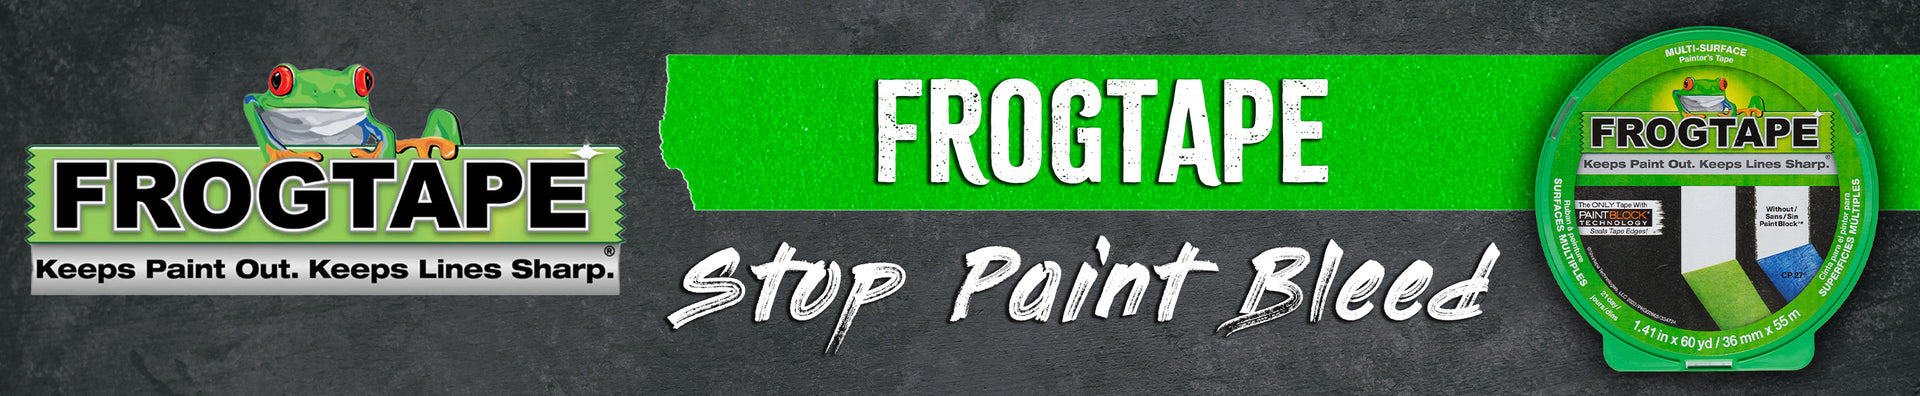 FrogTape, tape for professional painters